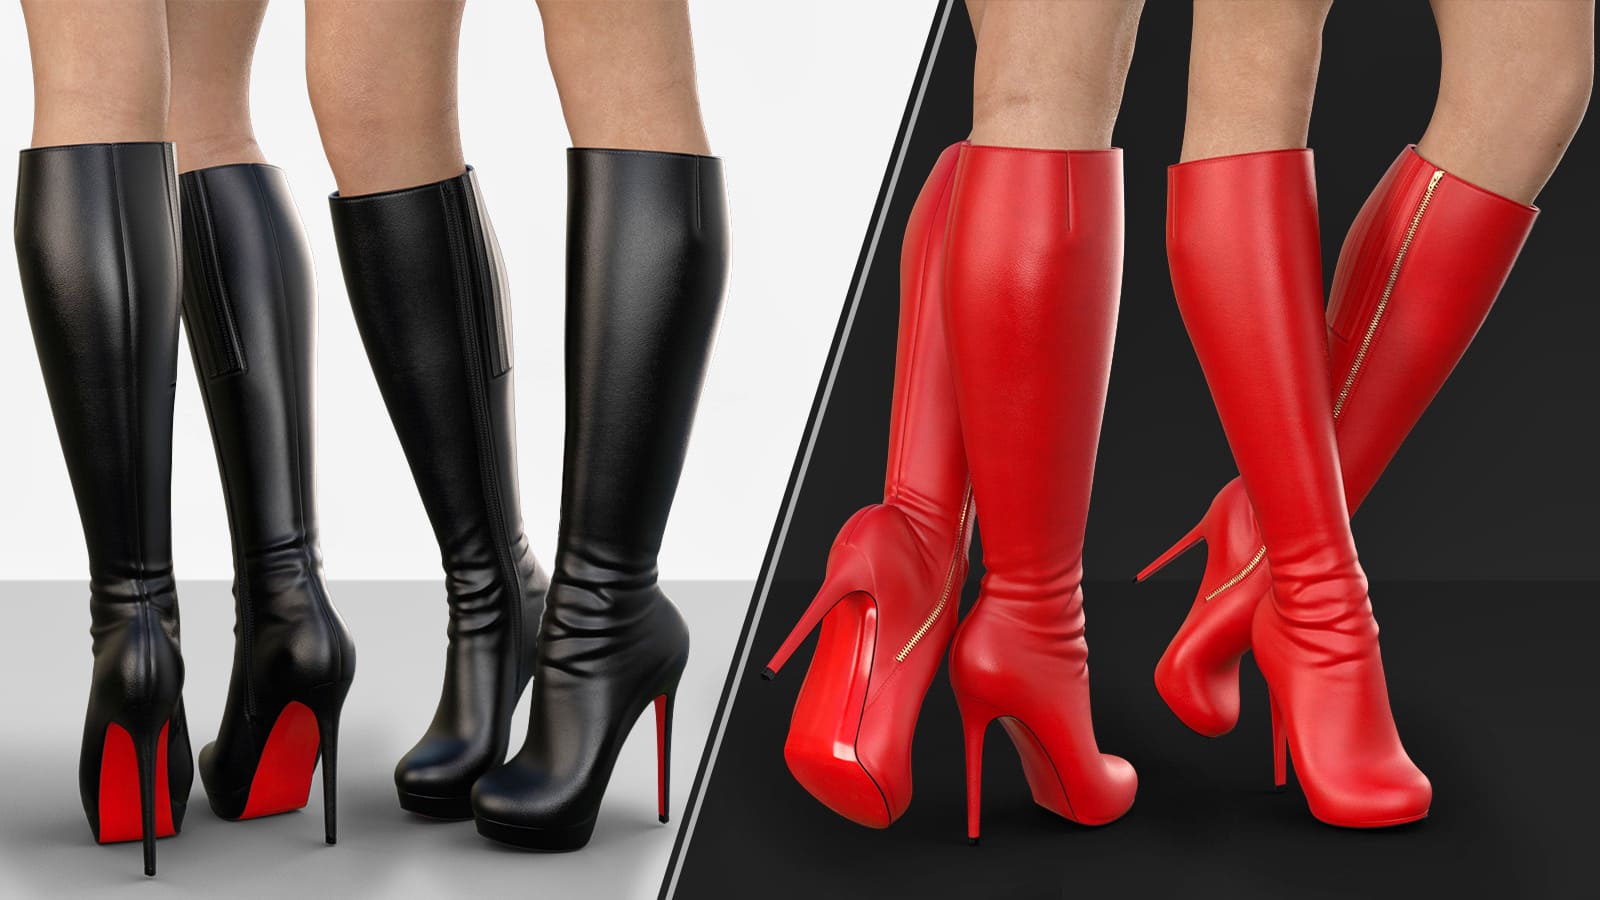 Knee High Stiletto Heel Boots for G8F and G8.1F_DAZ3DDL